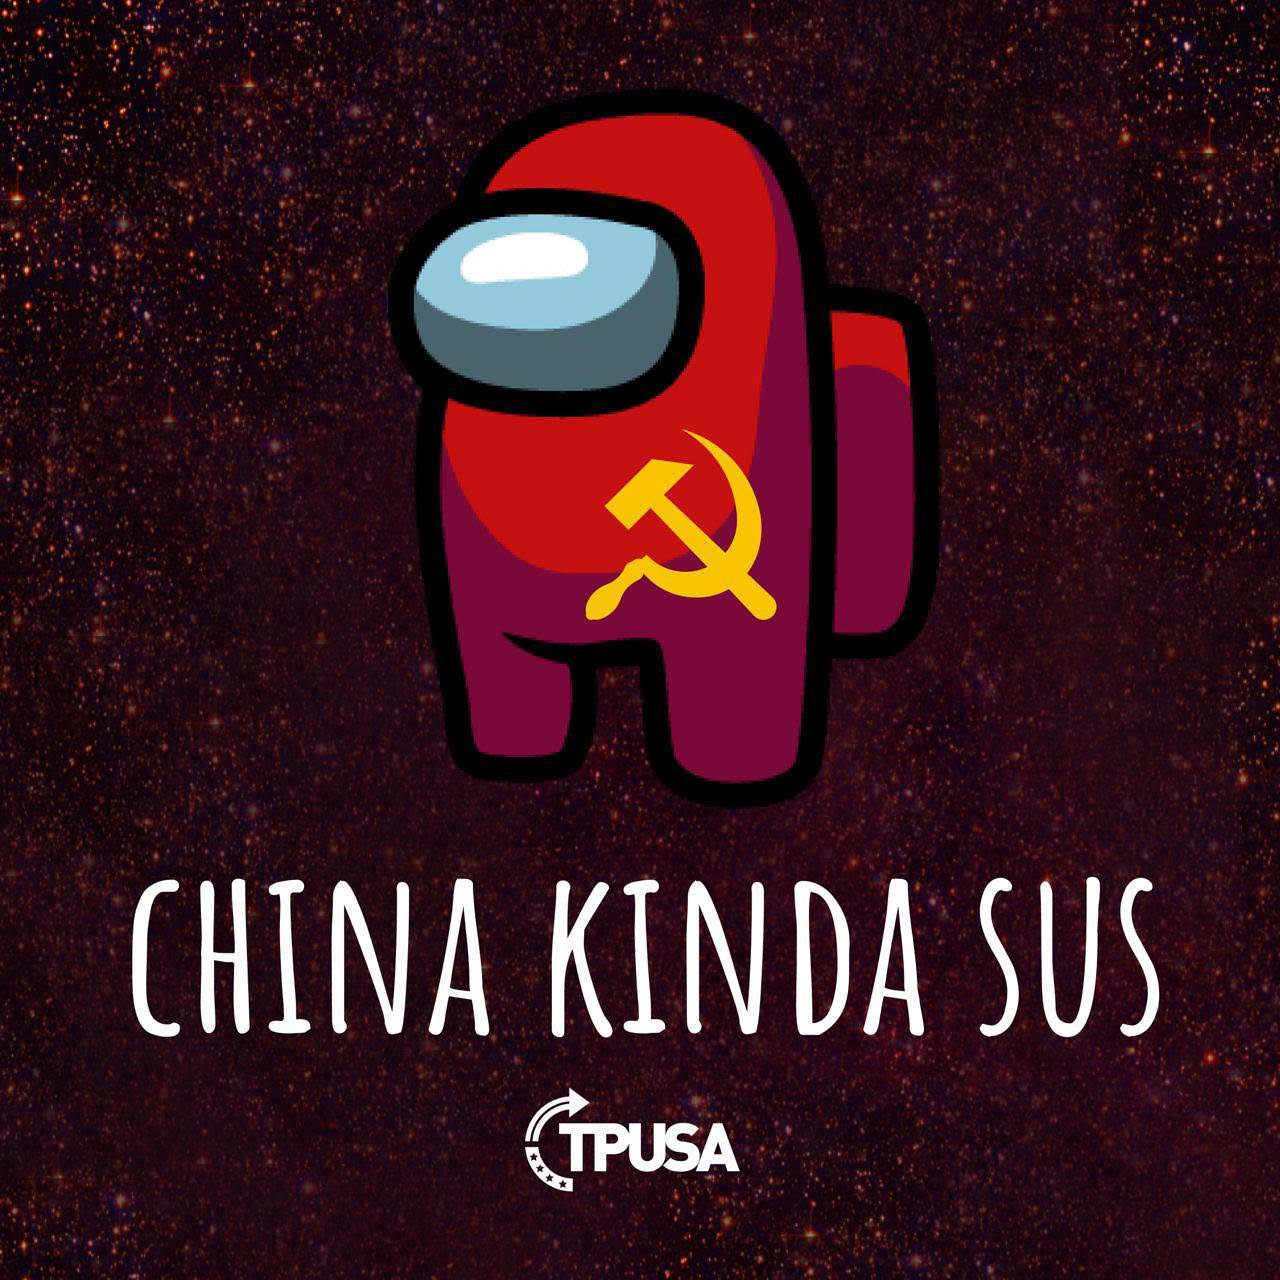 The "China Kinda Sus" sticker that members of the Turning Point USA chapter at Emerson College were selling. (Courtesy of TPUSA)